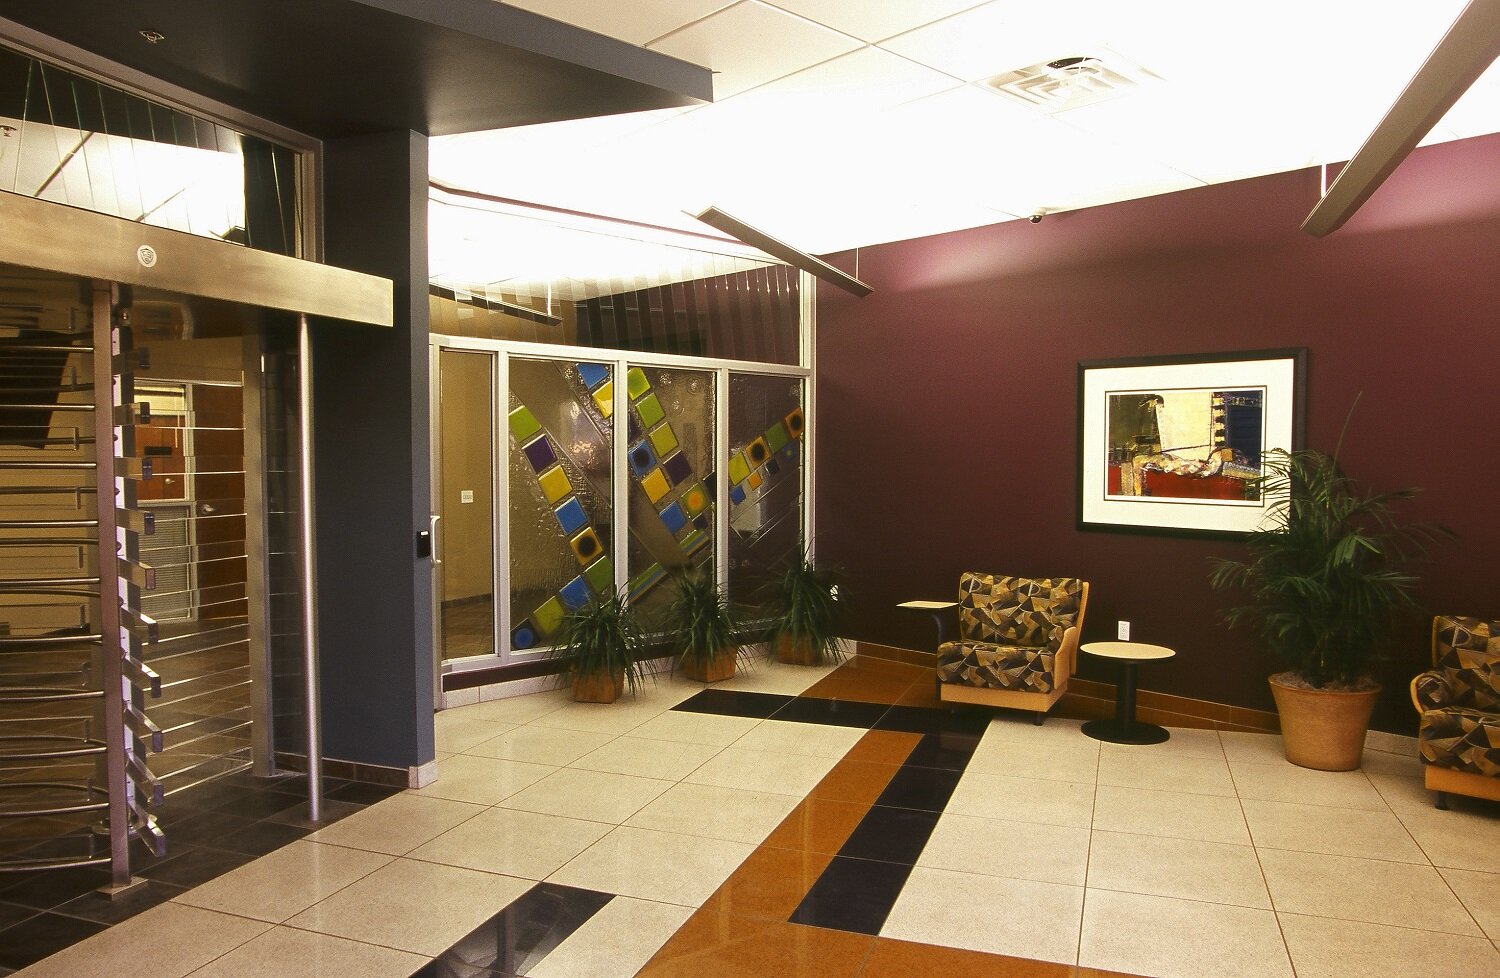 Lobby picture from Weitz.jpg